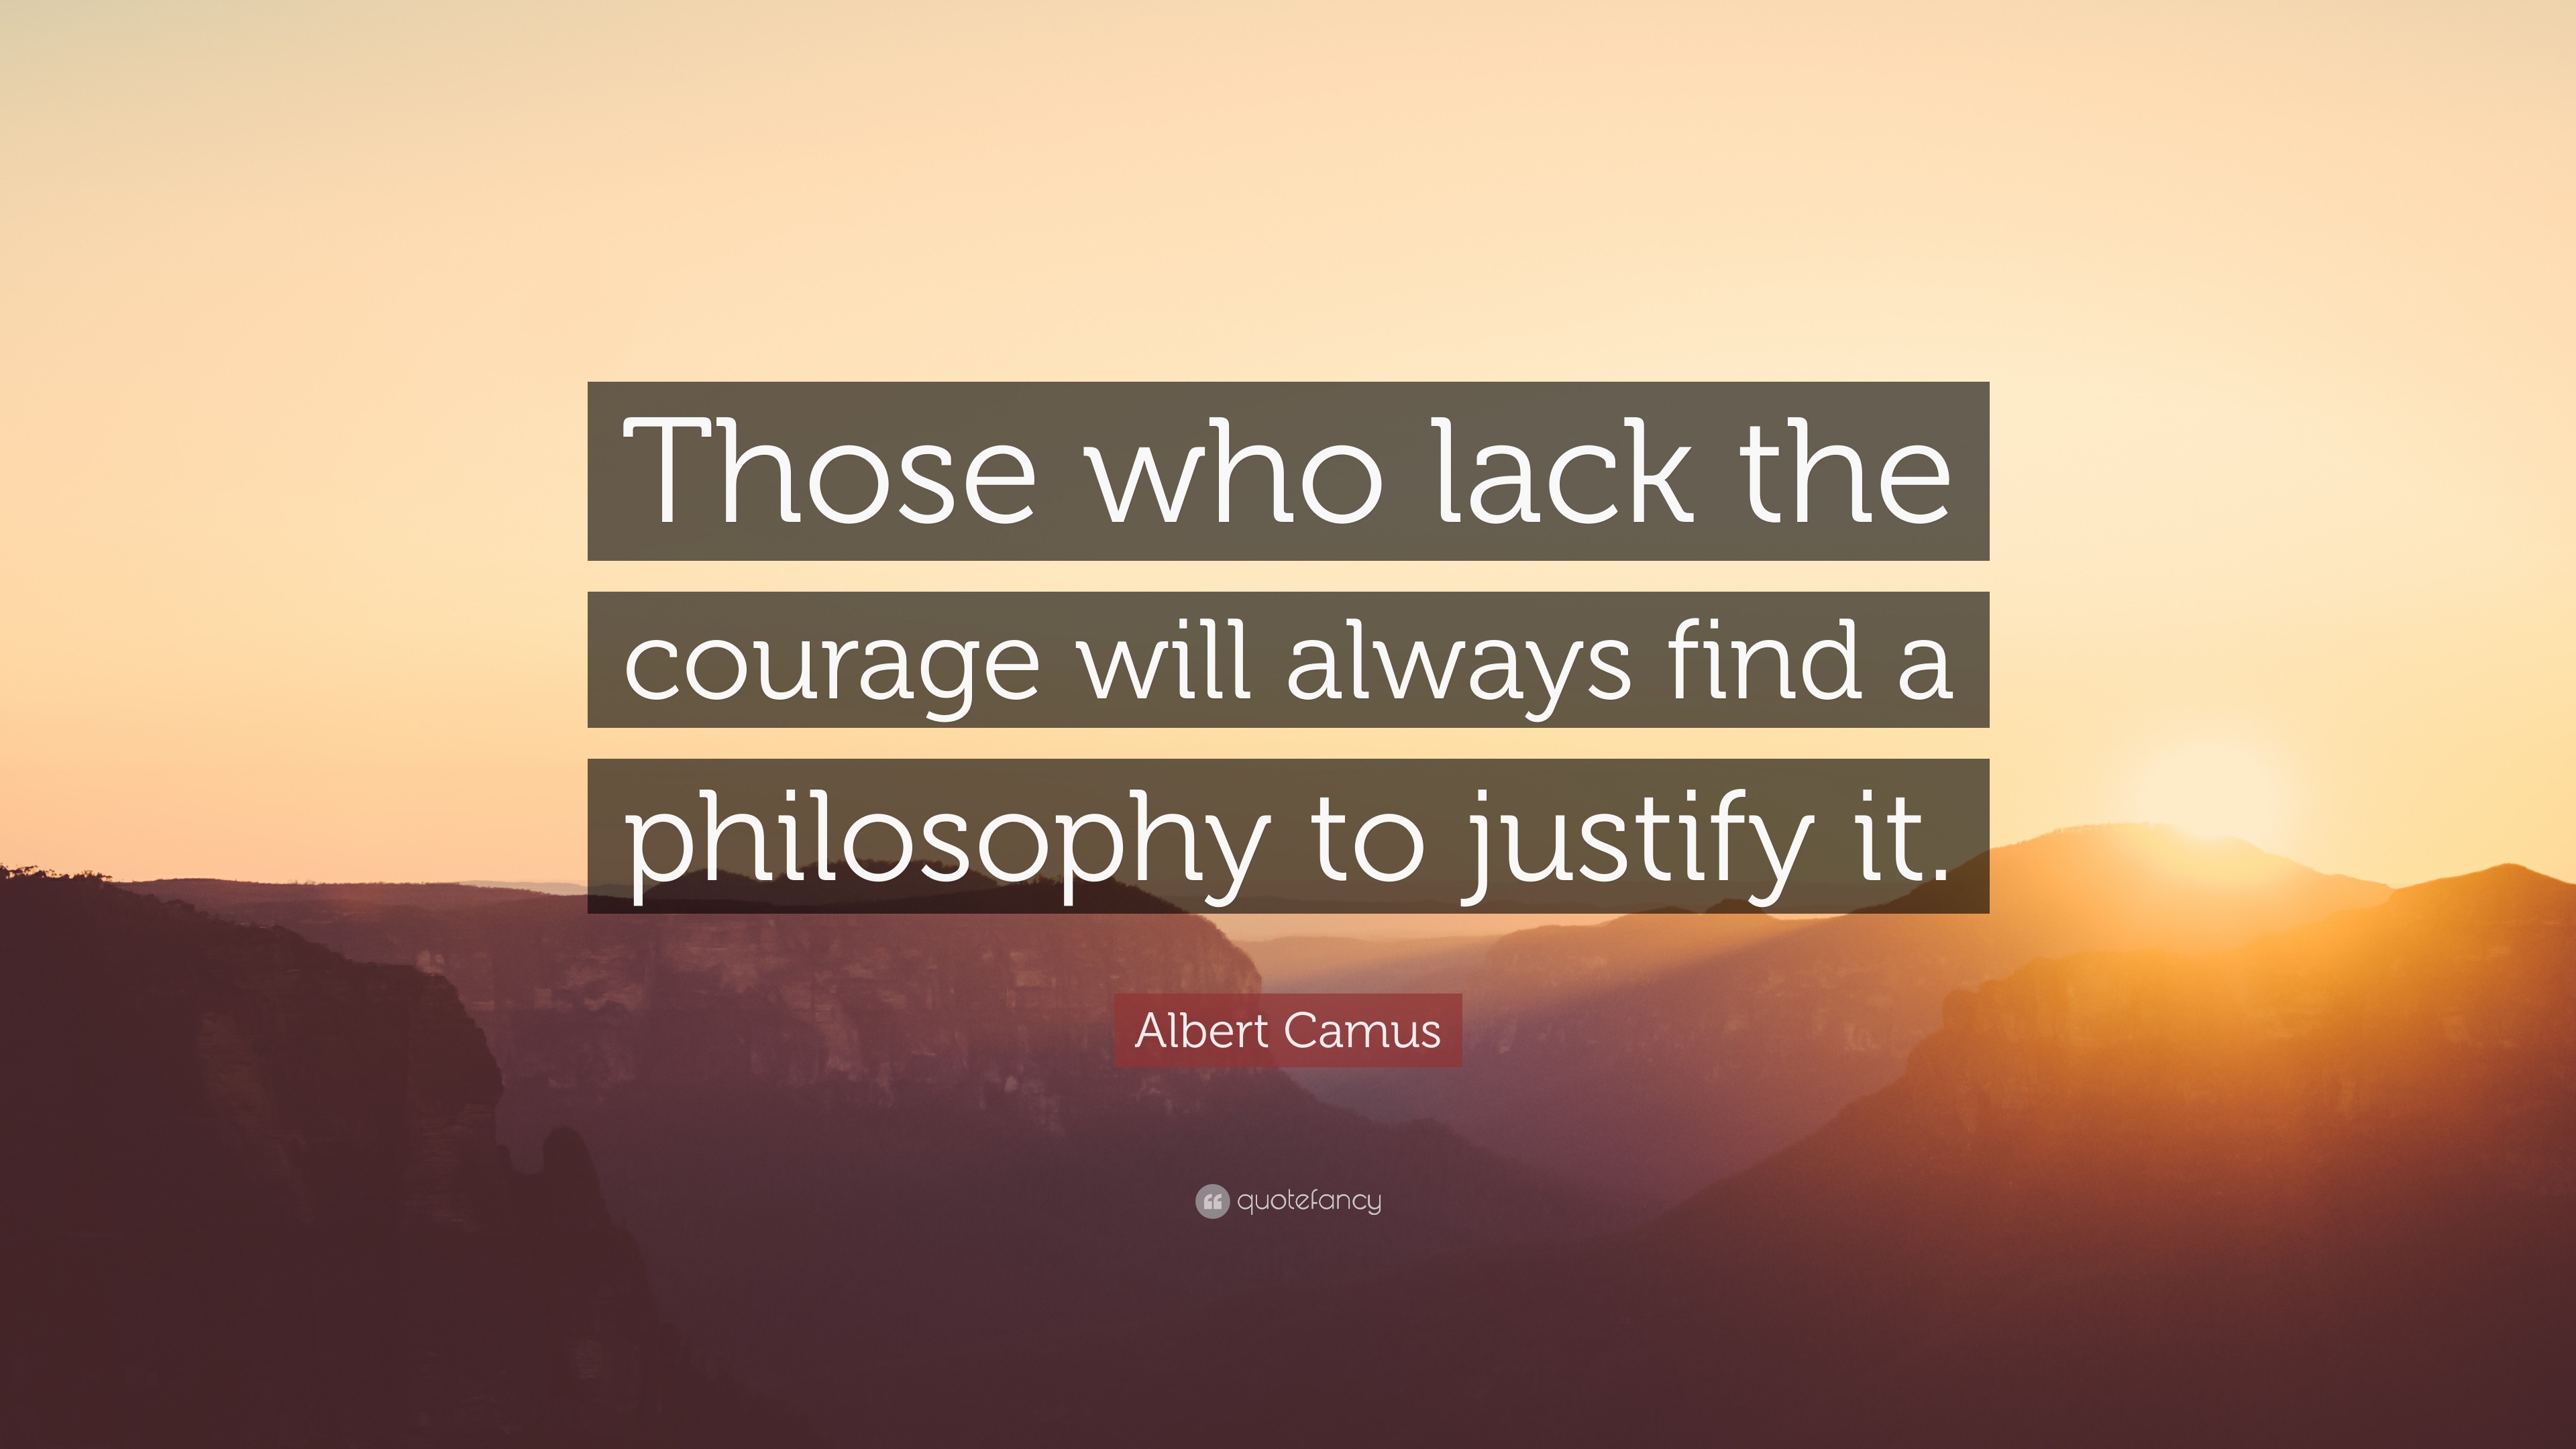 Albert Camus Quote: “Those who lack the courage will always find a ...